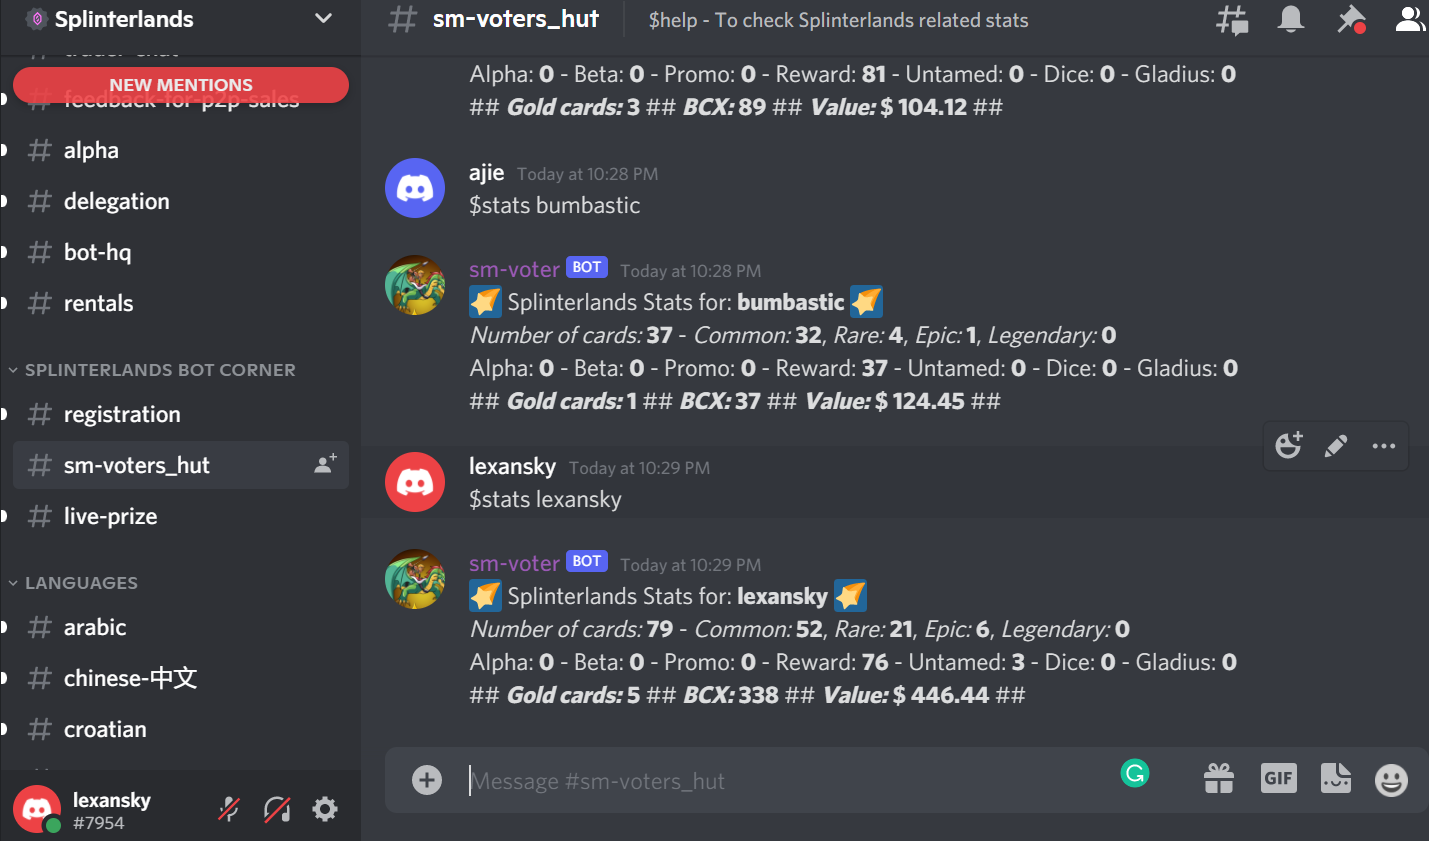 discord.PNG